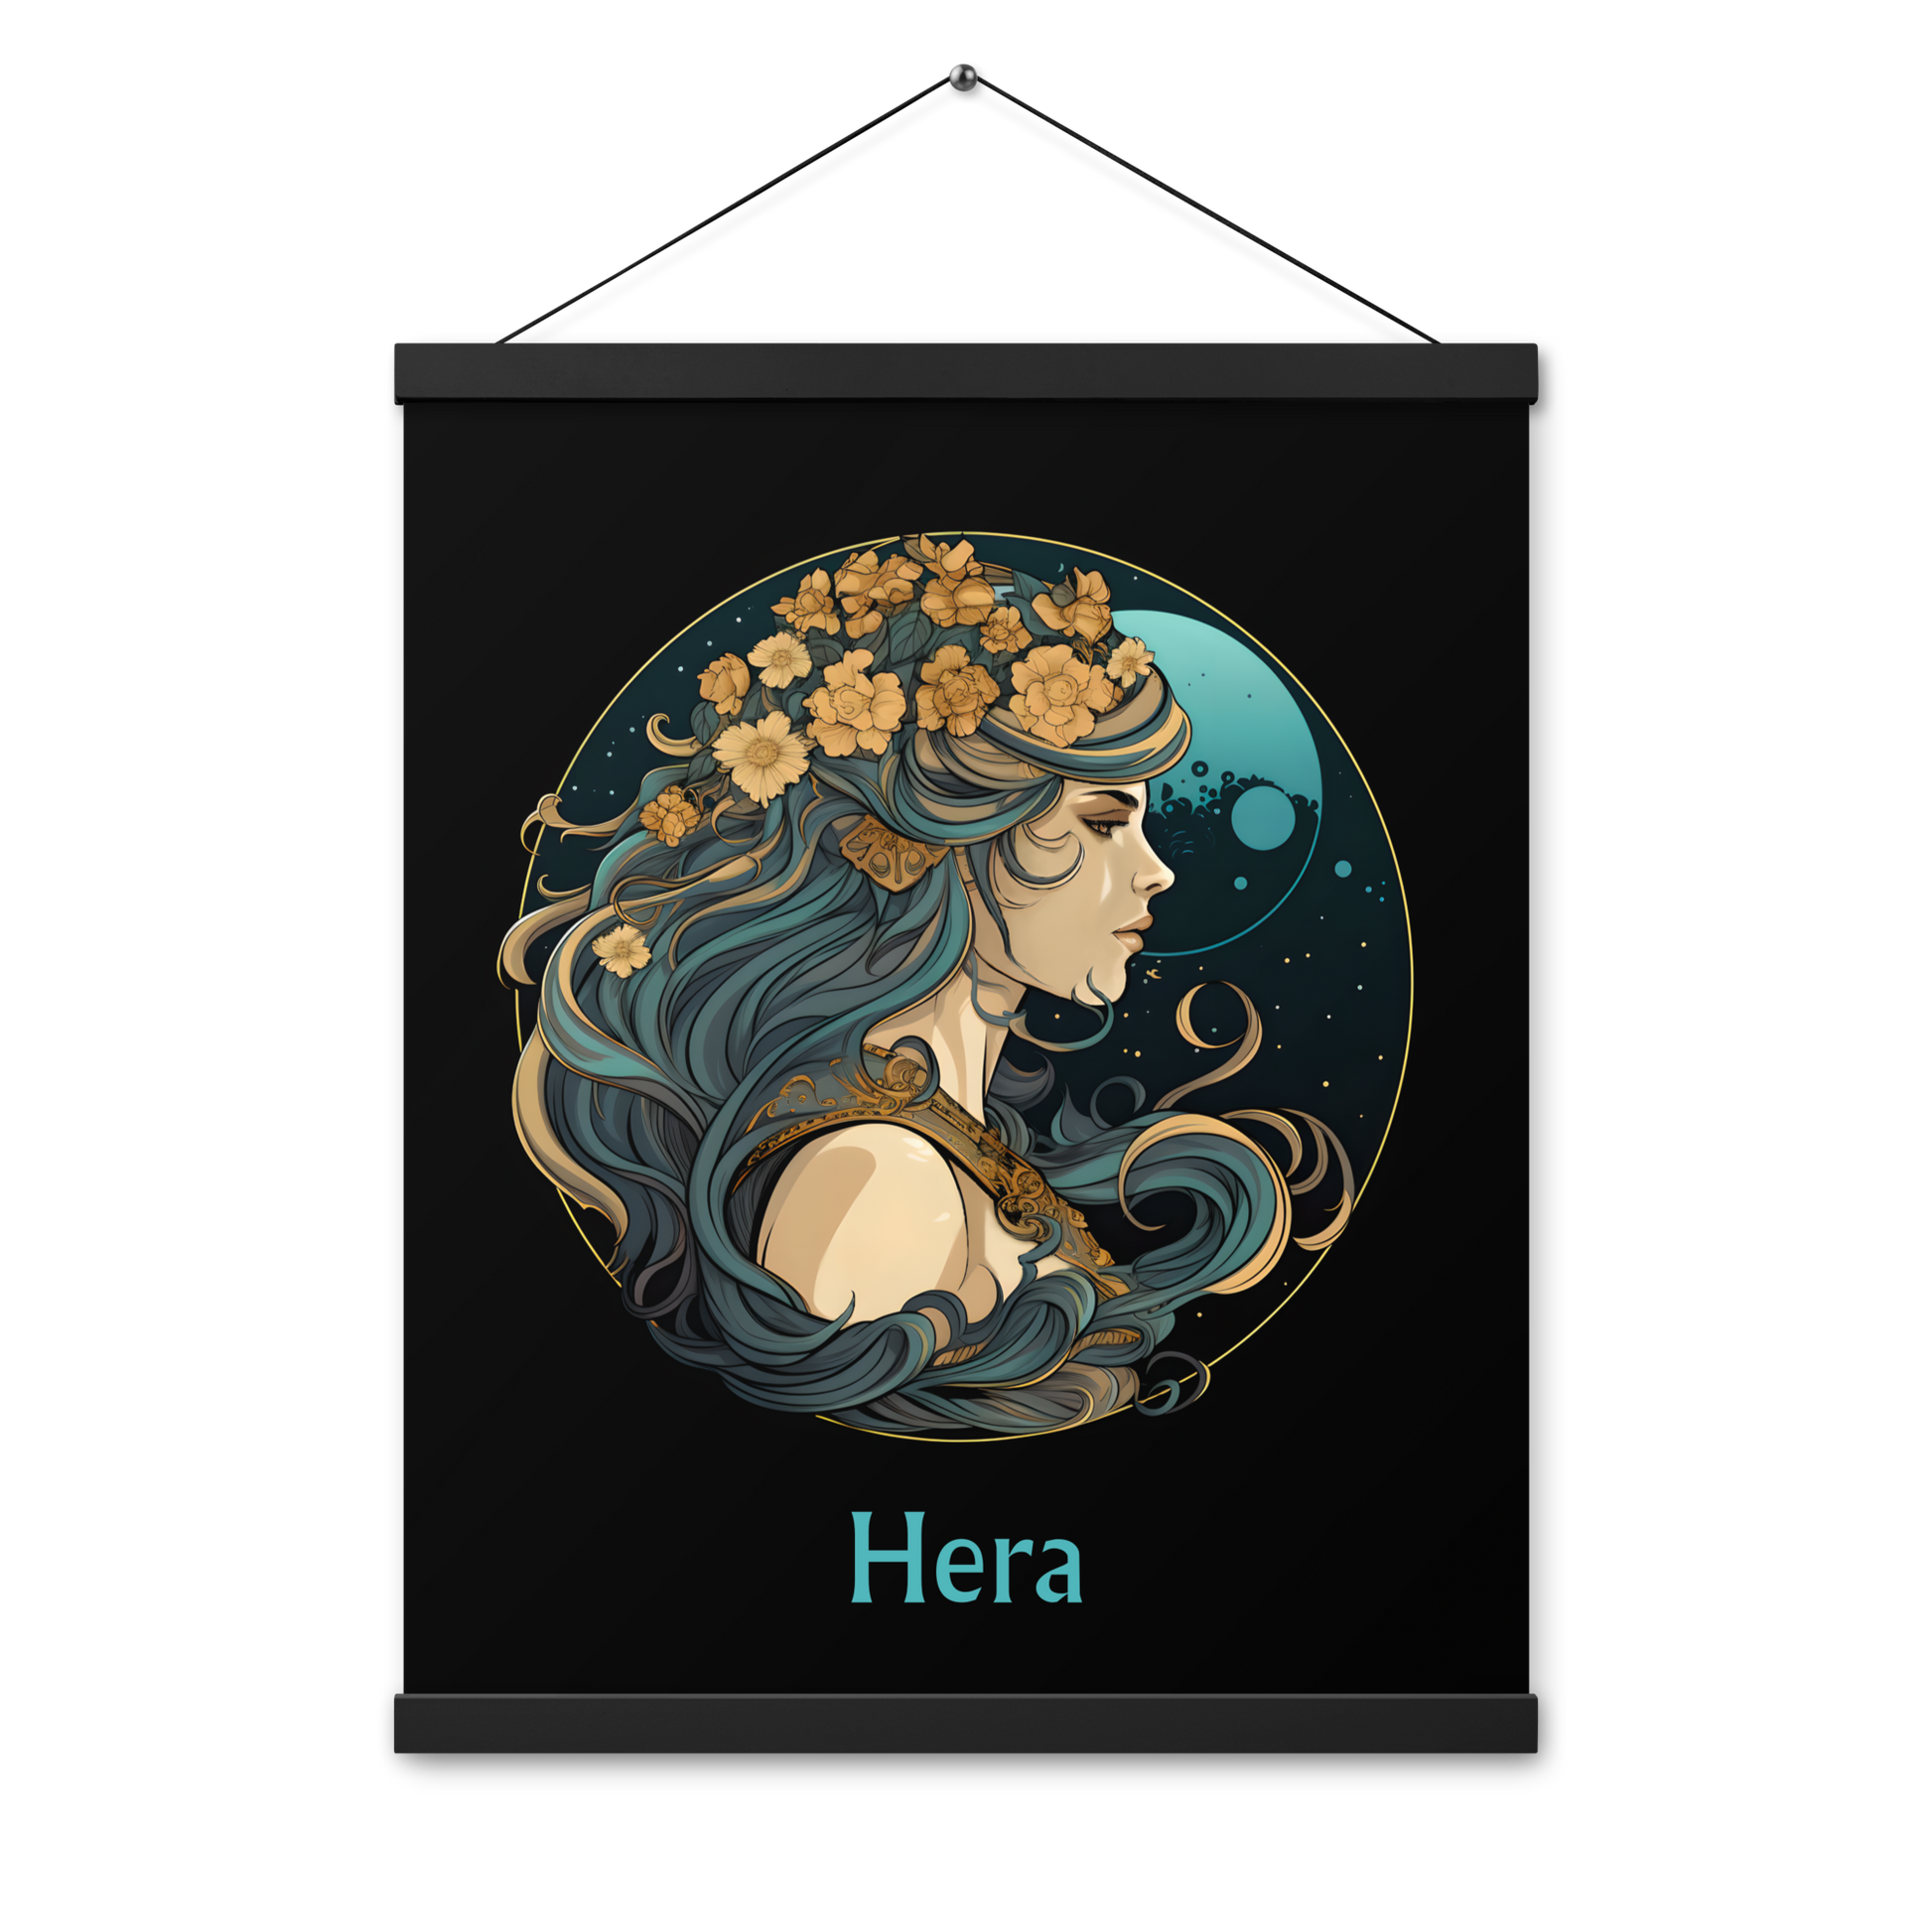 Hera's Devotion - Colorful Hanging Wall Art High Quality Matte Poster DrawDadDraw